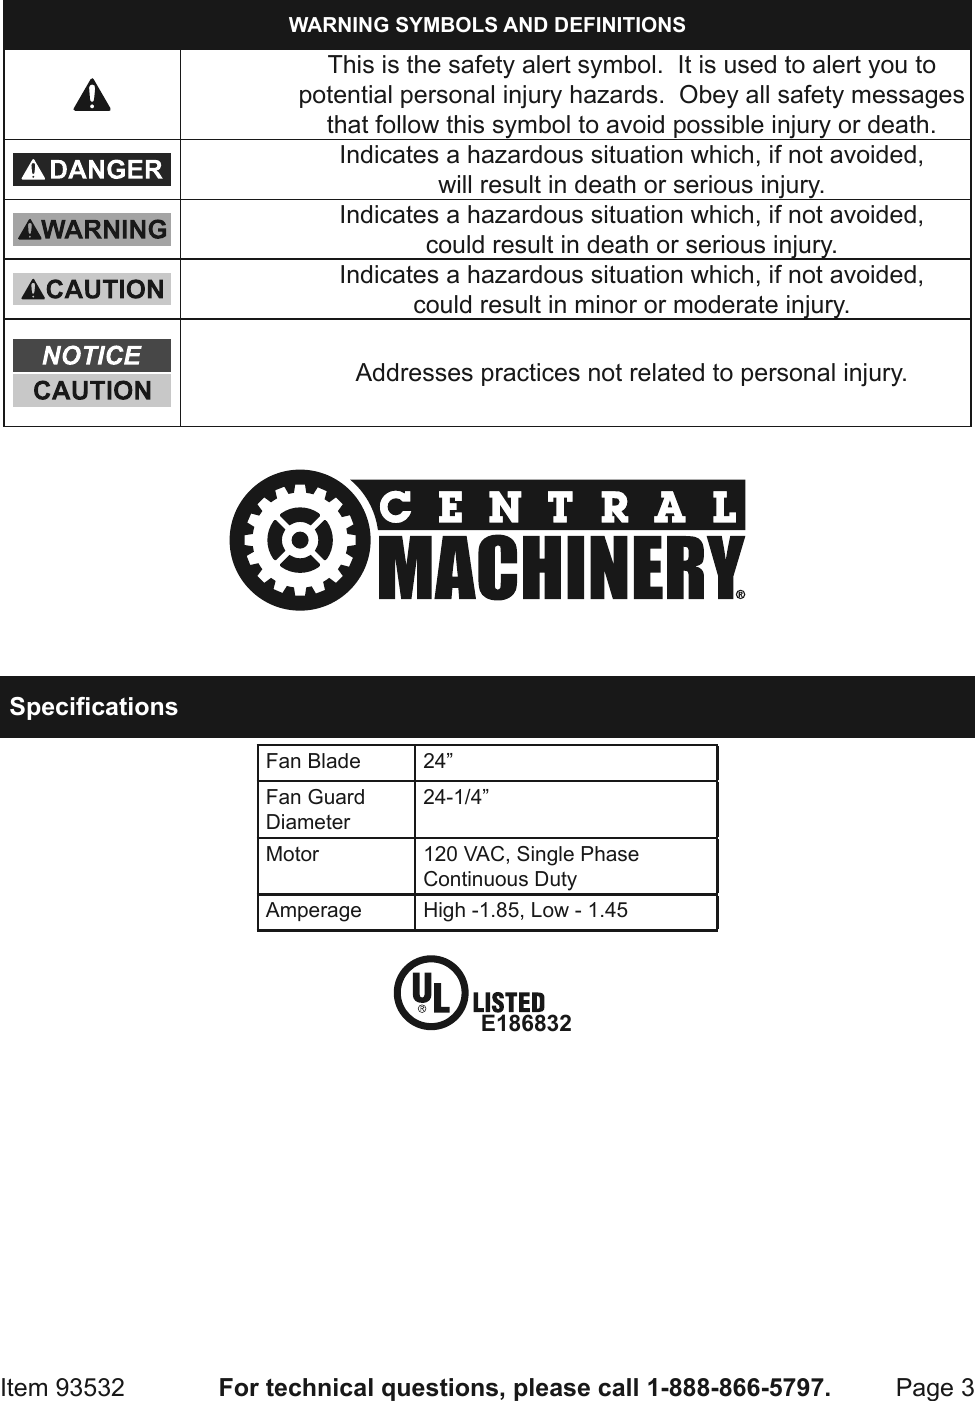 Page 3 of 8 - Harbor-Freight Harbor-Freight-24-In-High-Velocity-Shop-Fan-Product-Manual-  Harbor-freight-24-in-high-velocity-shop-fan-product-manual